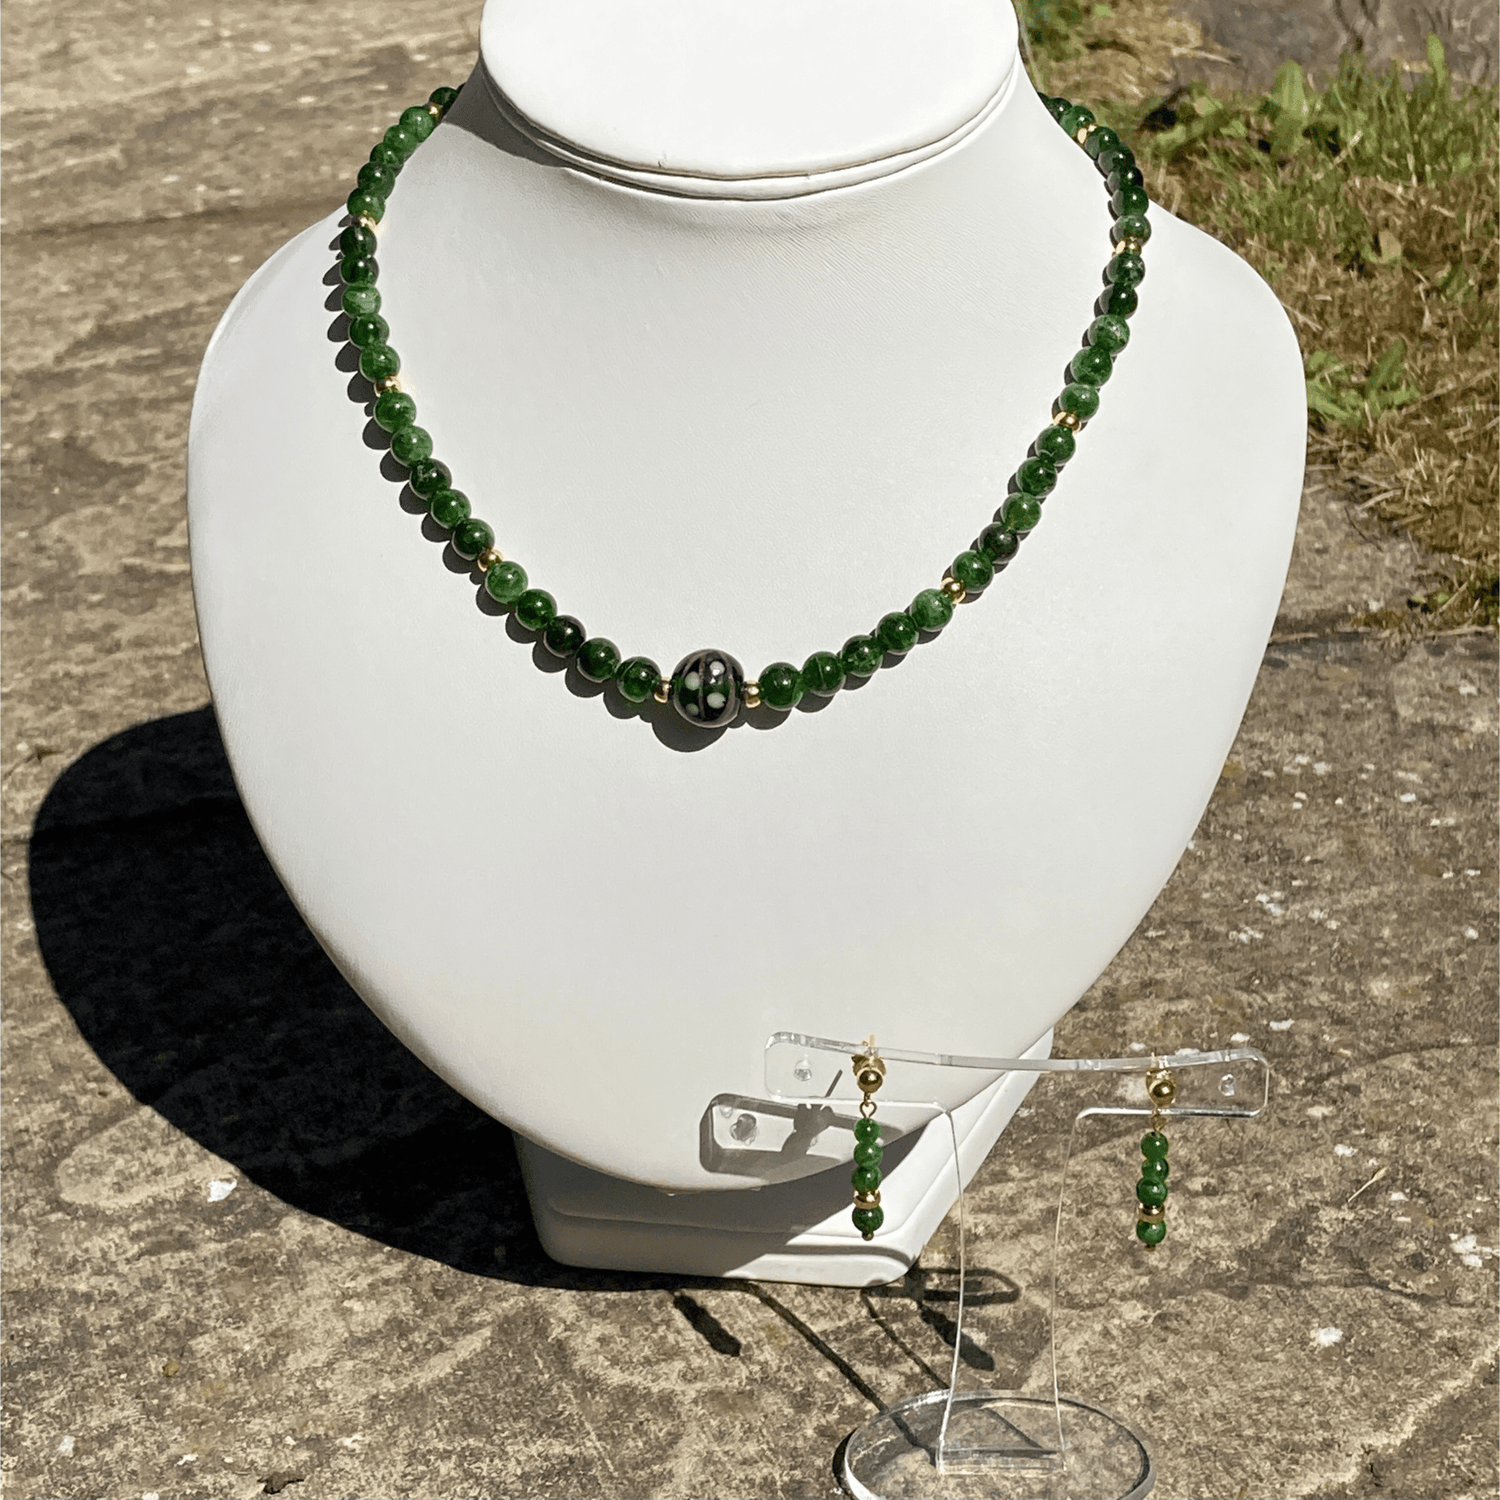 Handmade Russian Chrome Diopside Gemstone And Sterling Silver Necklace And Earrings Set